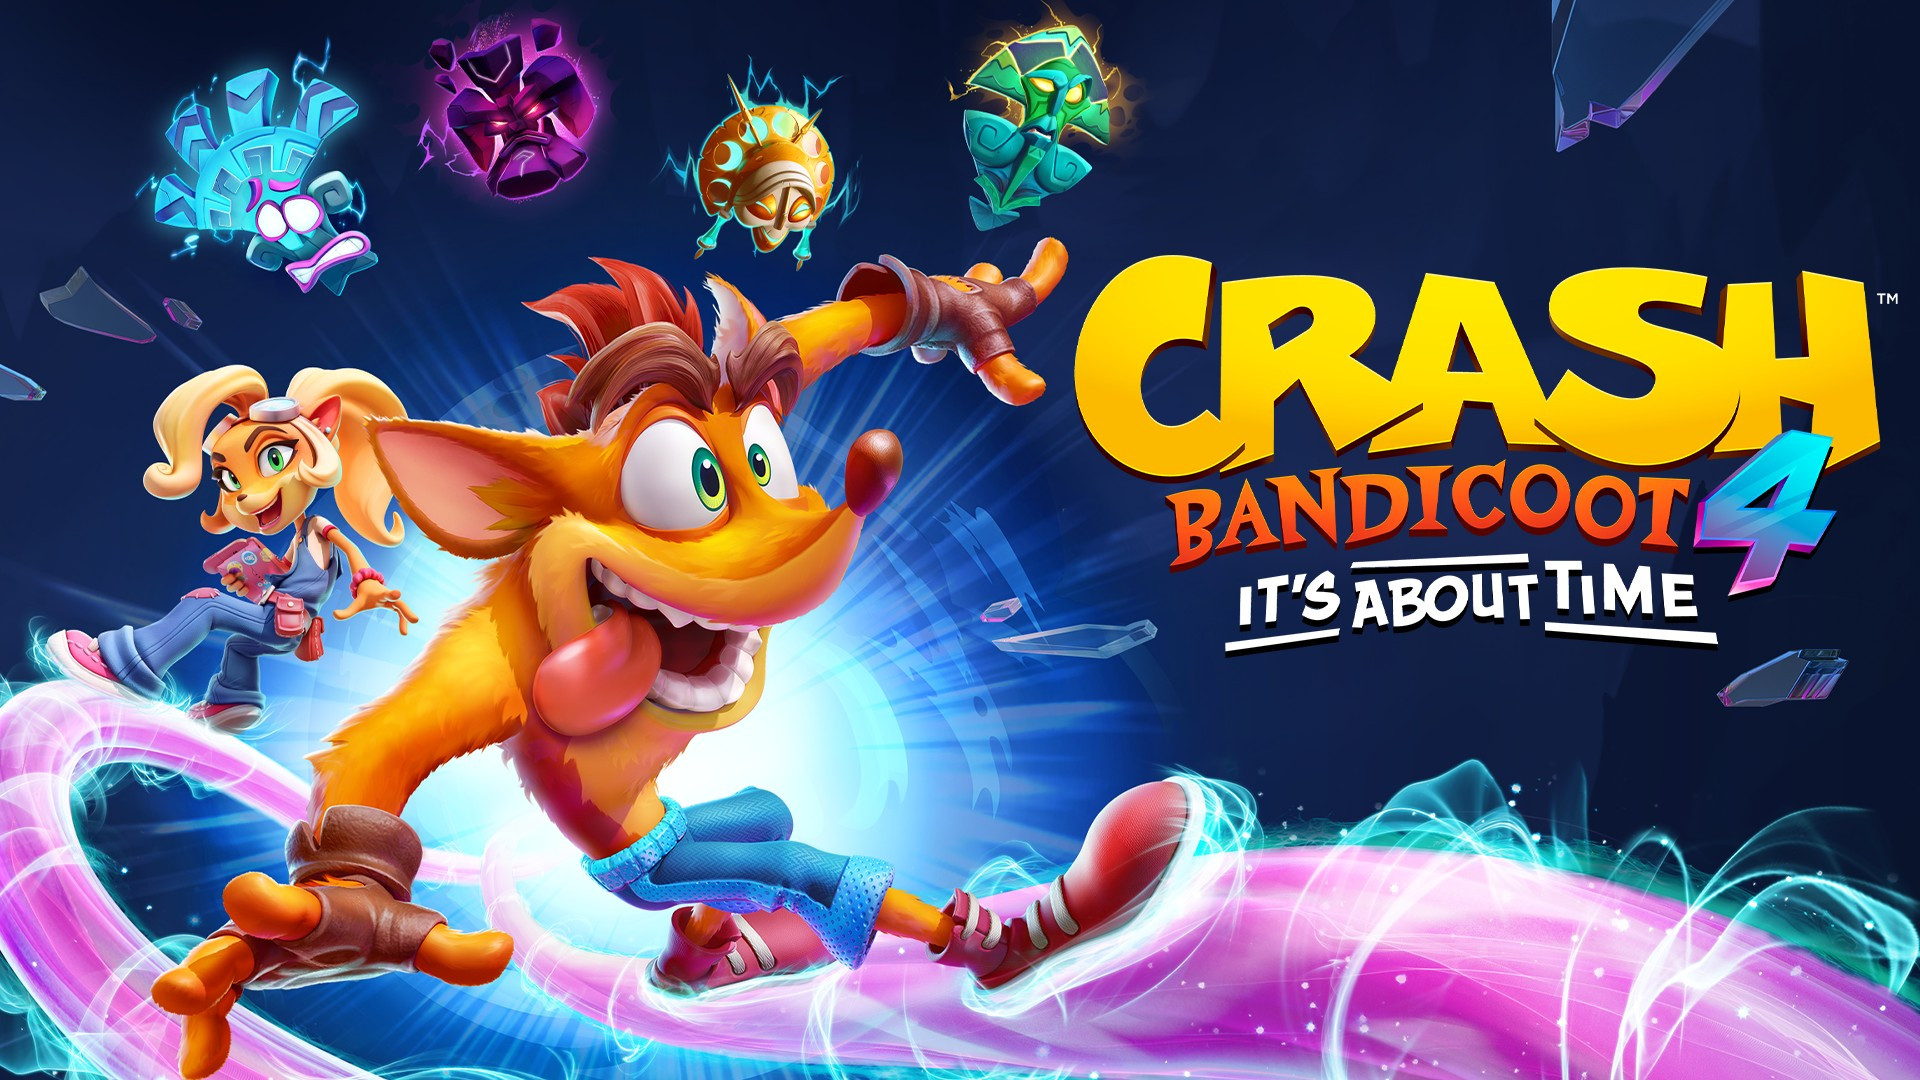 Crash Bandicoot 4: It’s About Time – Get Now For Free